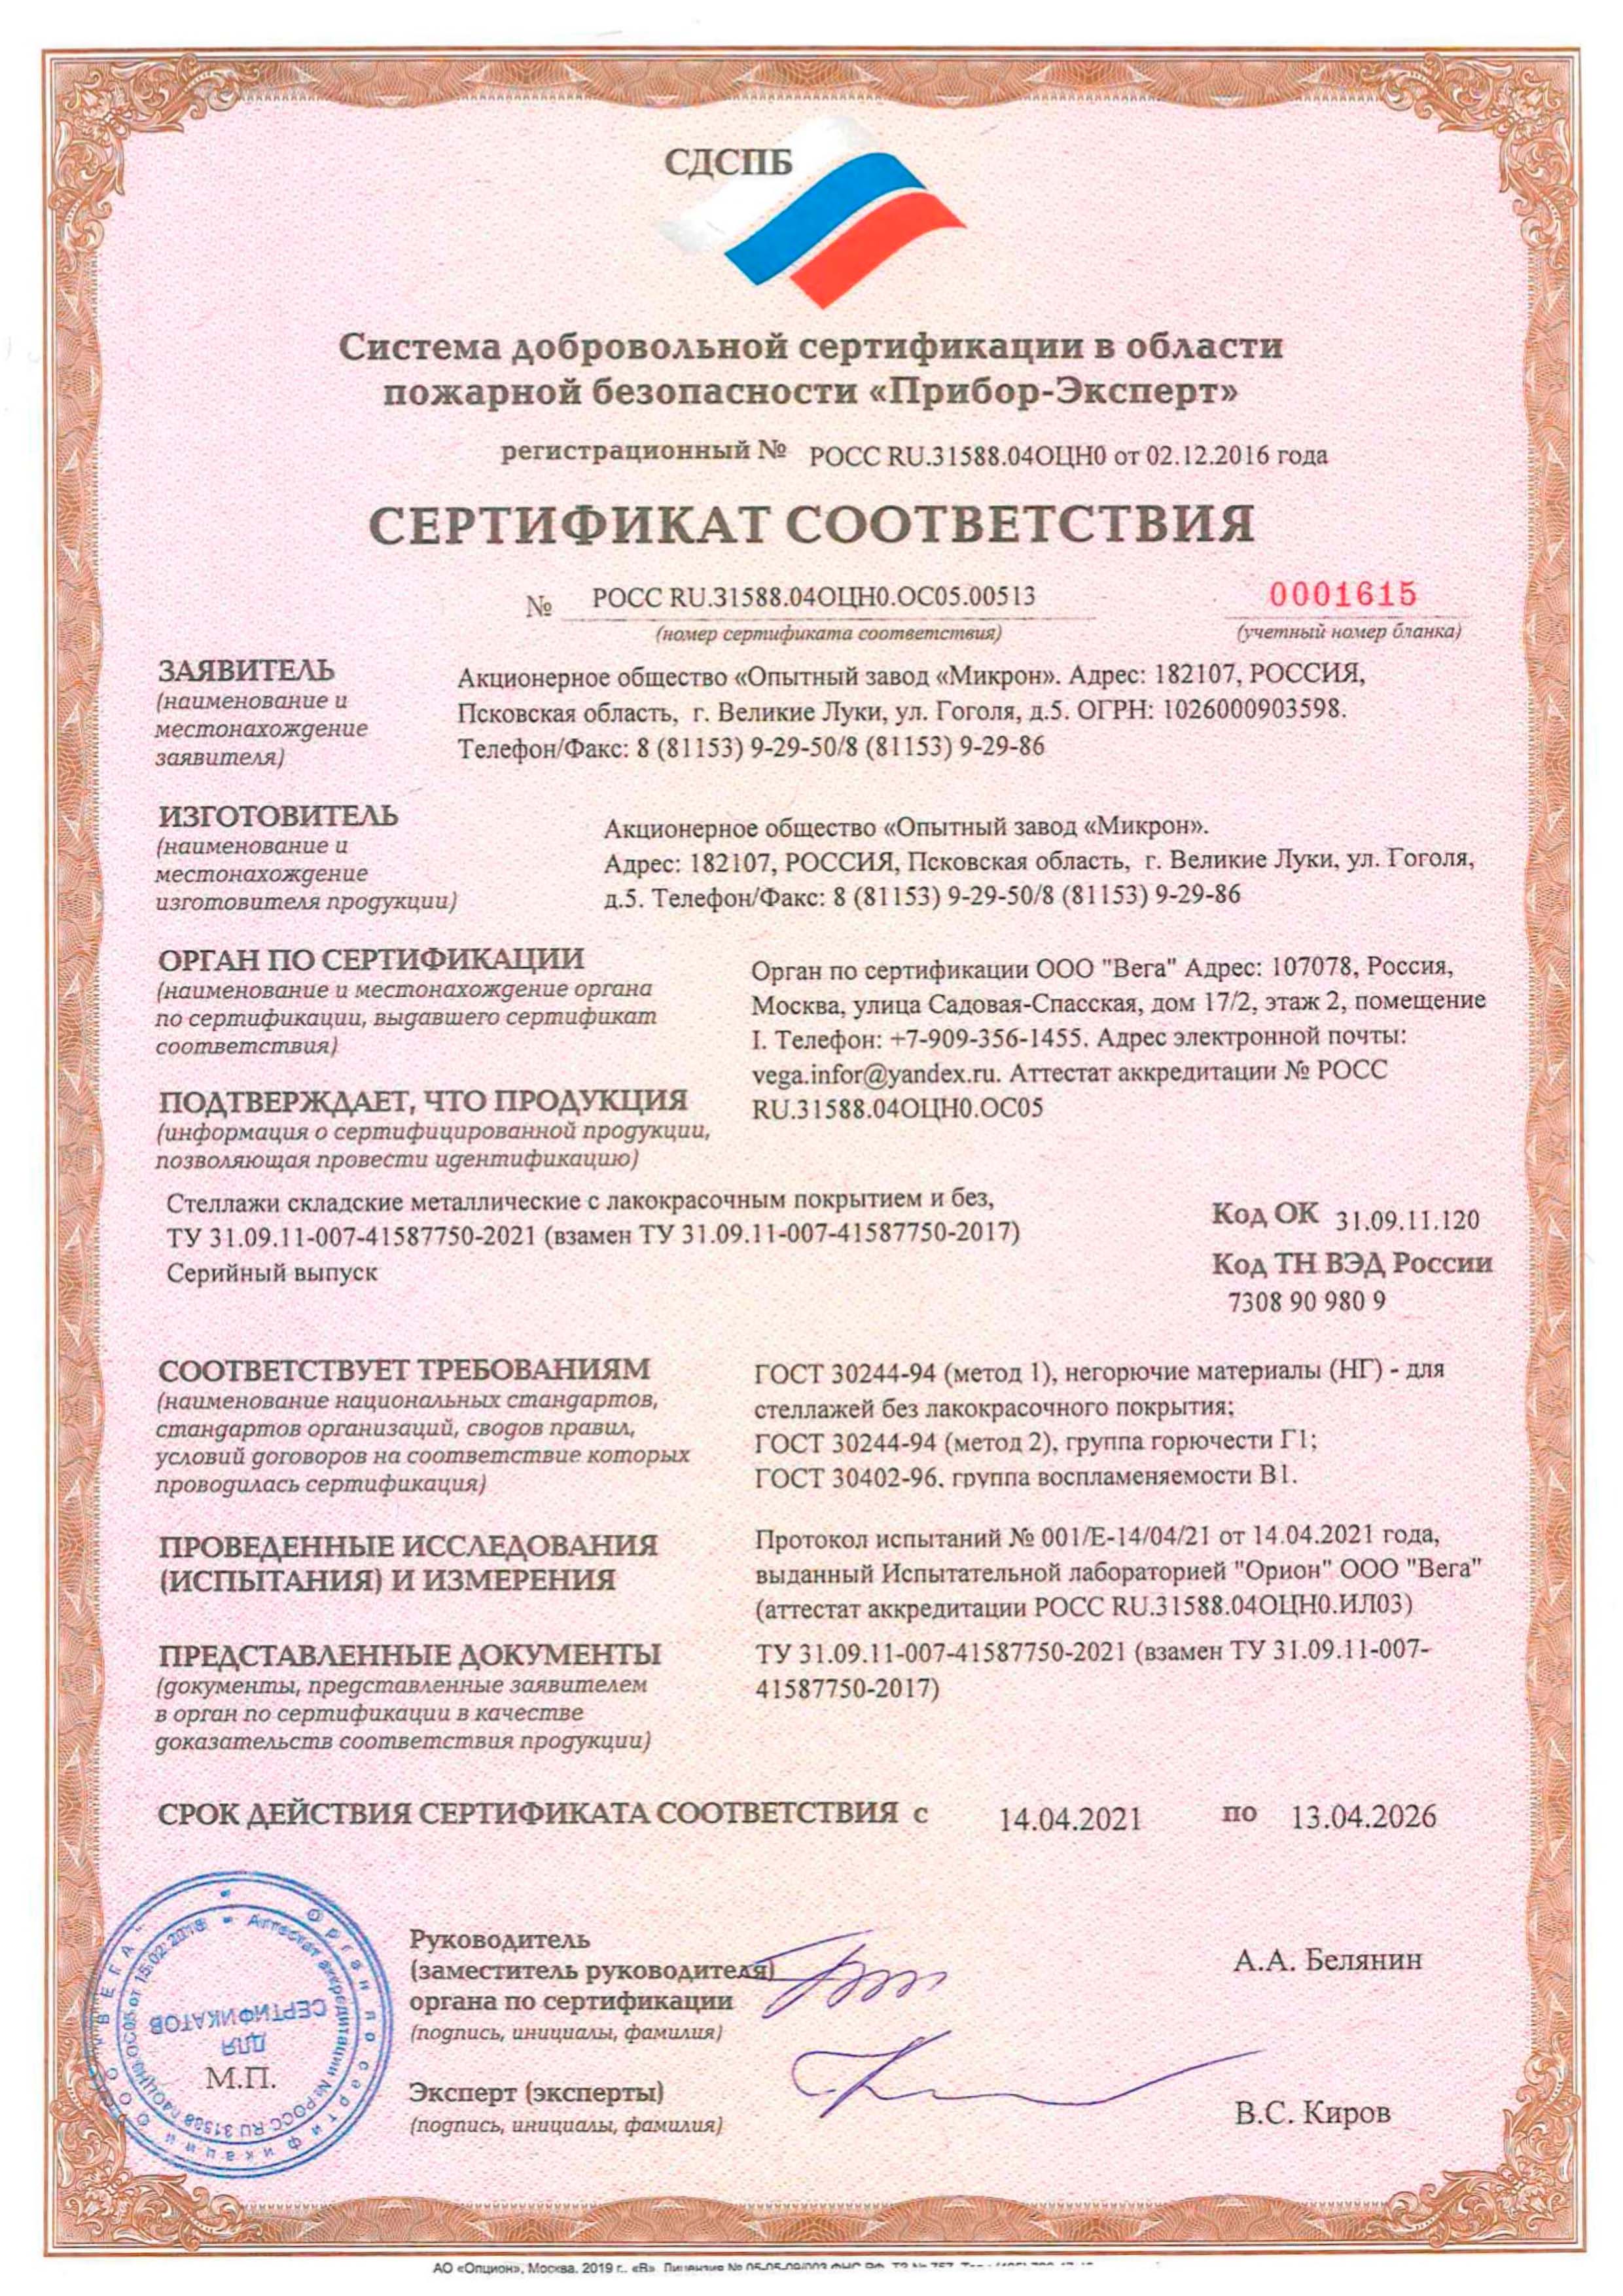 Non-profit partnership "Self-regulated organization of fire safety specialists "POZHSOYUZ". Certificate of conformity of fire safety products